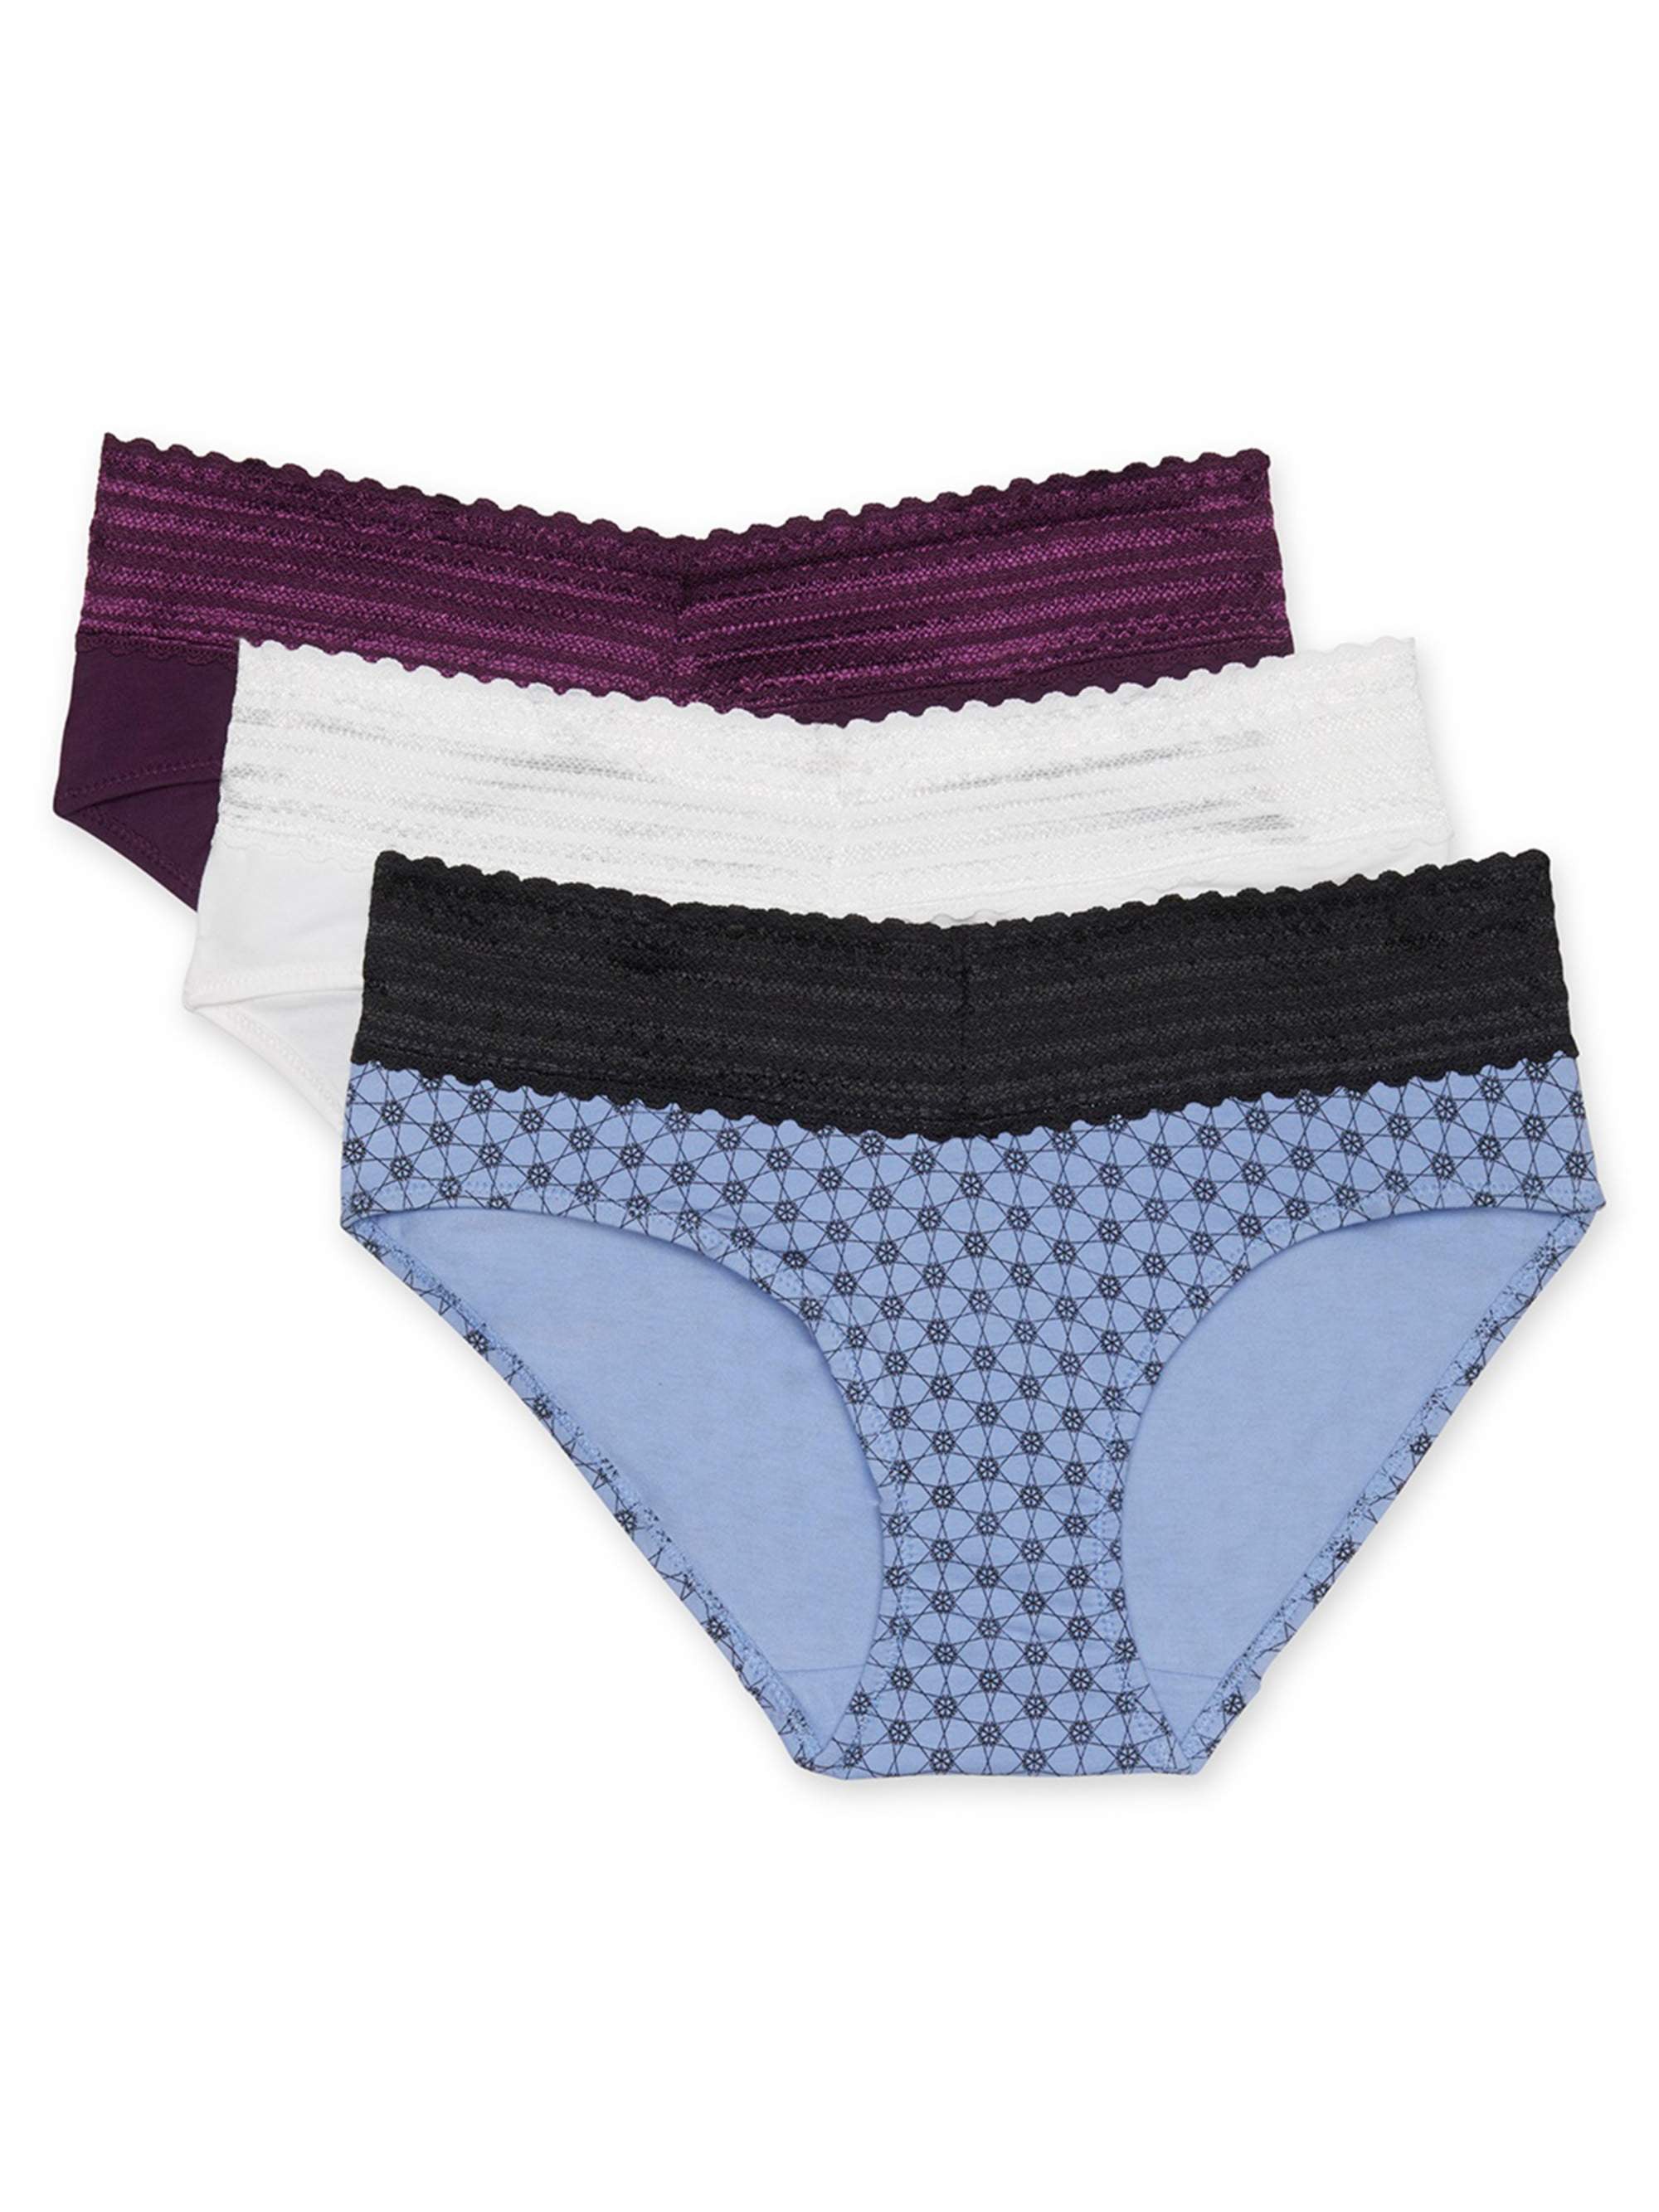 Fruit of the Loom Women's No Show Hipster Underwear, 3 Pack